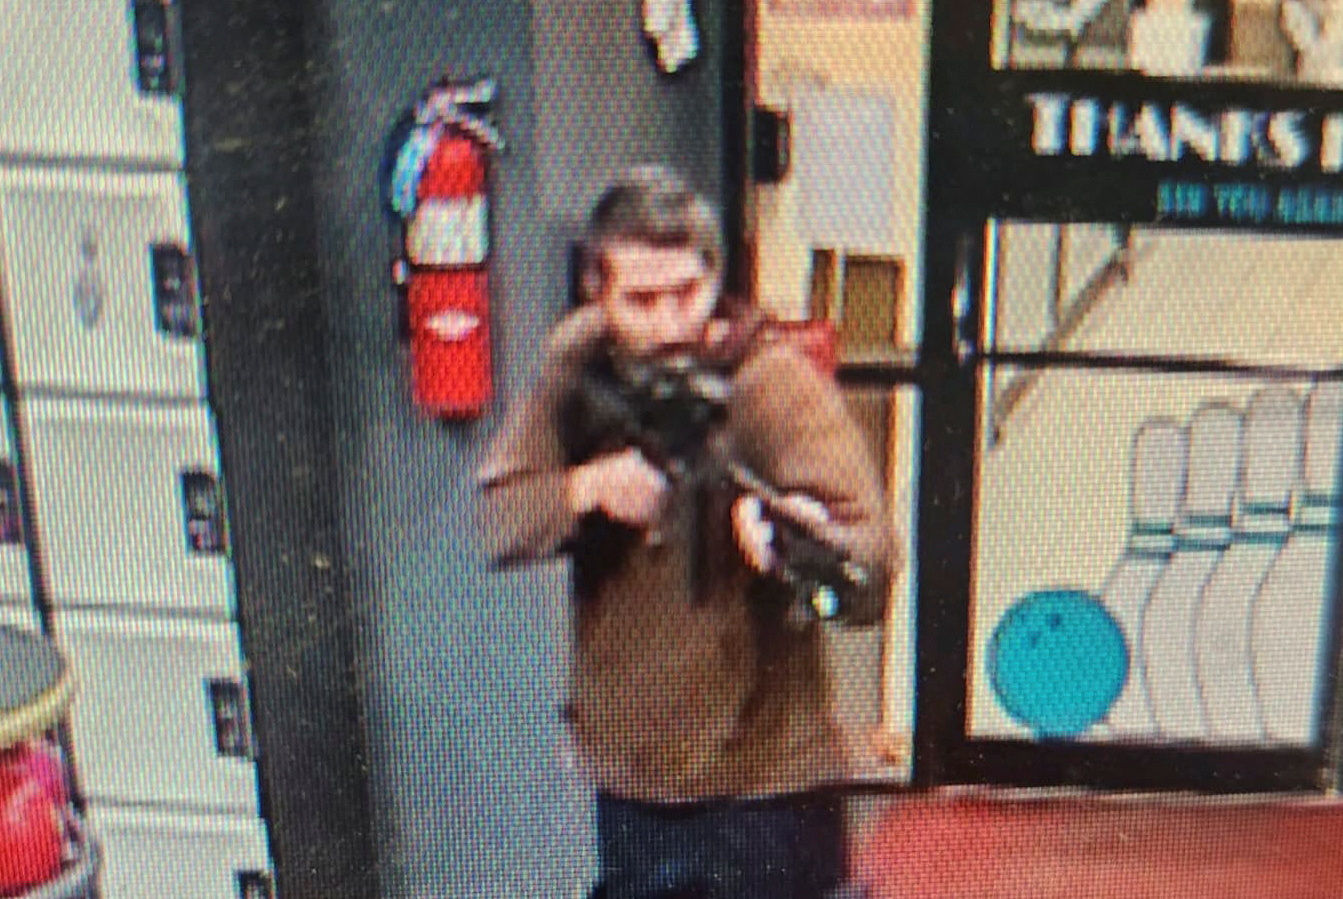 A man identified as a suspect by police points what appears to be a semiautomatic rifle, in Lewiston